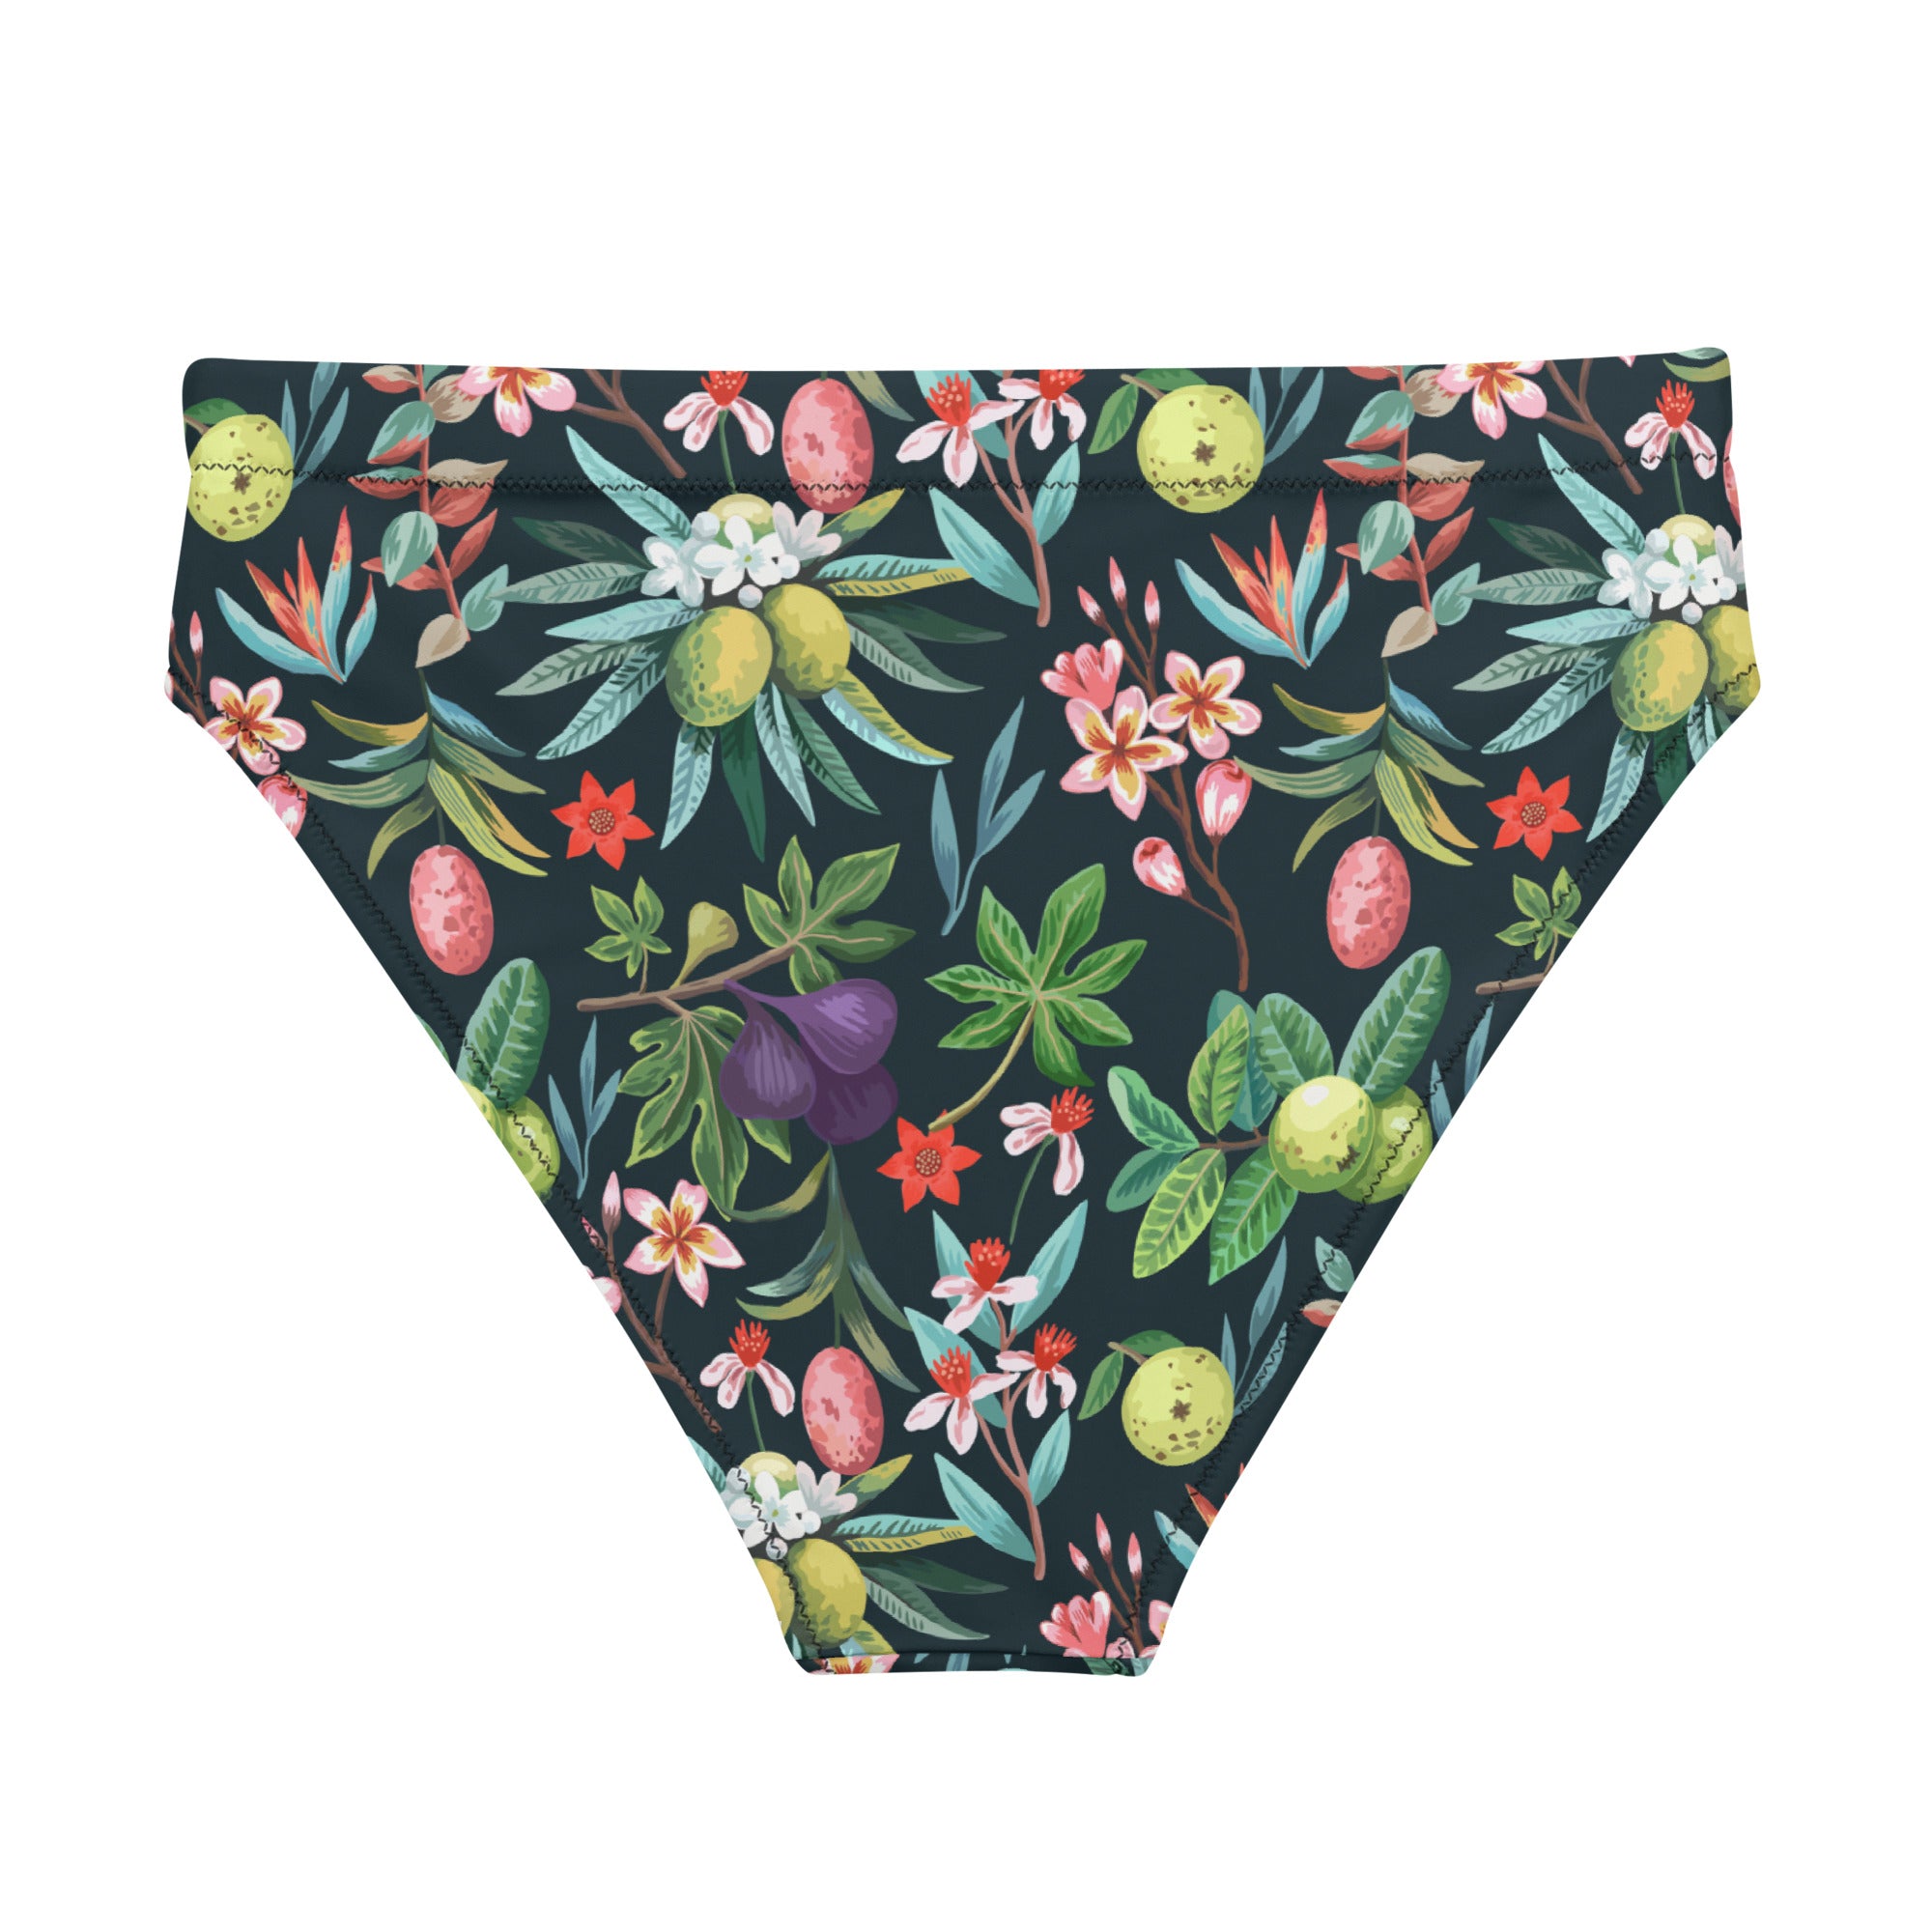 Whether you're lounging by the pool or hitting the beach, these Flower Print Bikini Bottoms are the perfect choice for a chic and fashionable swimwear look.